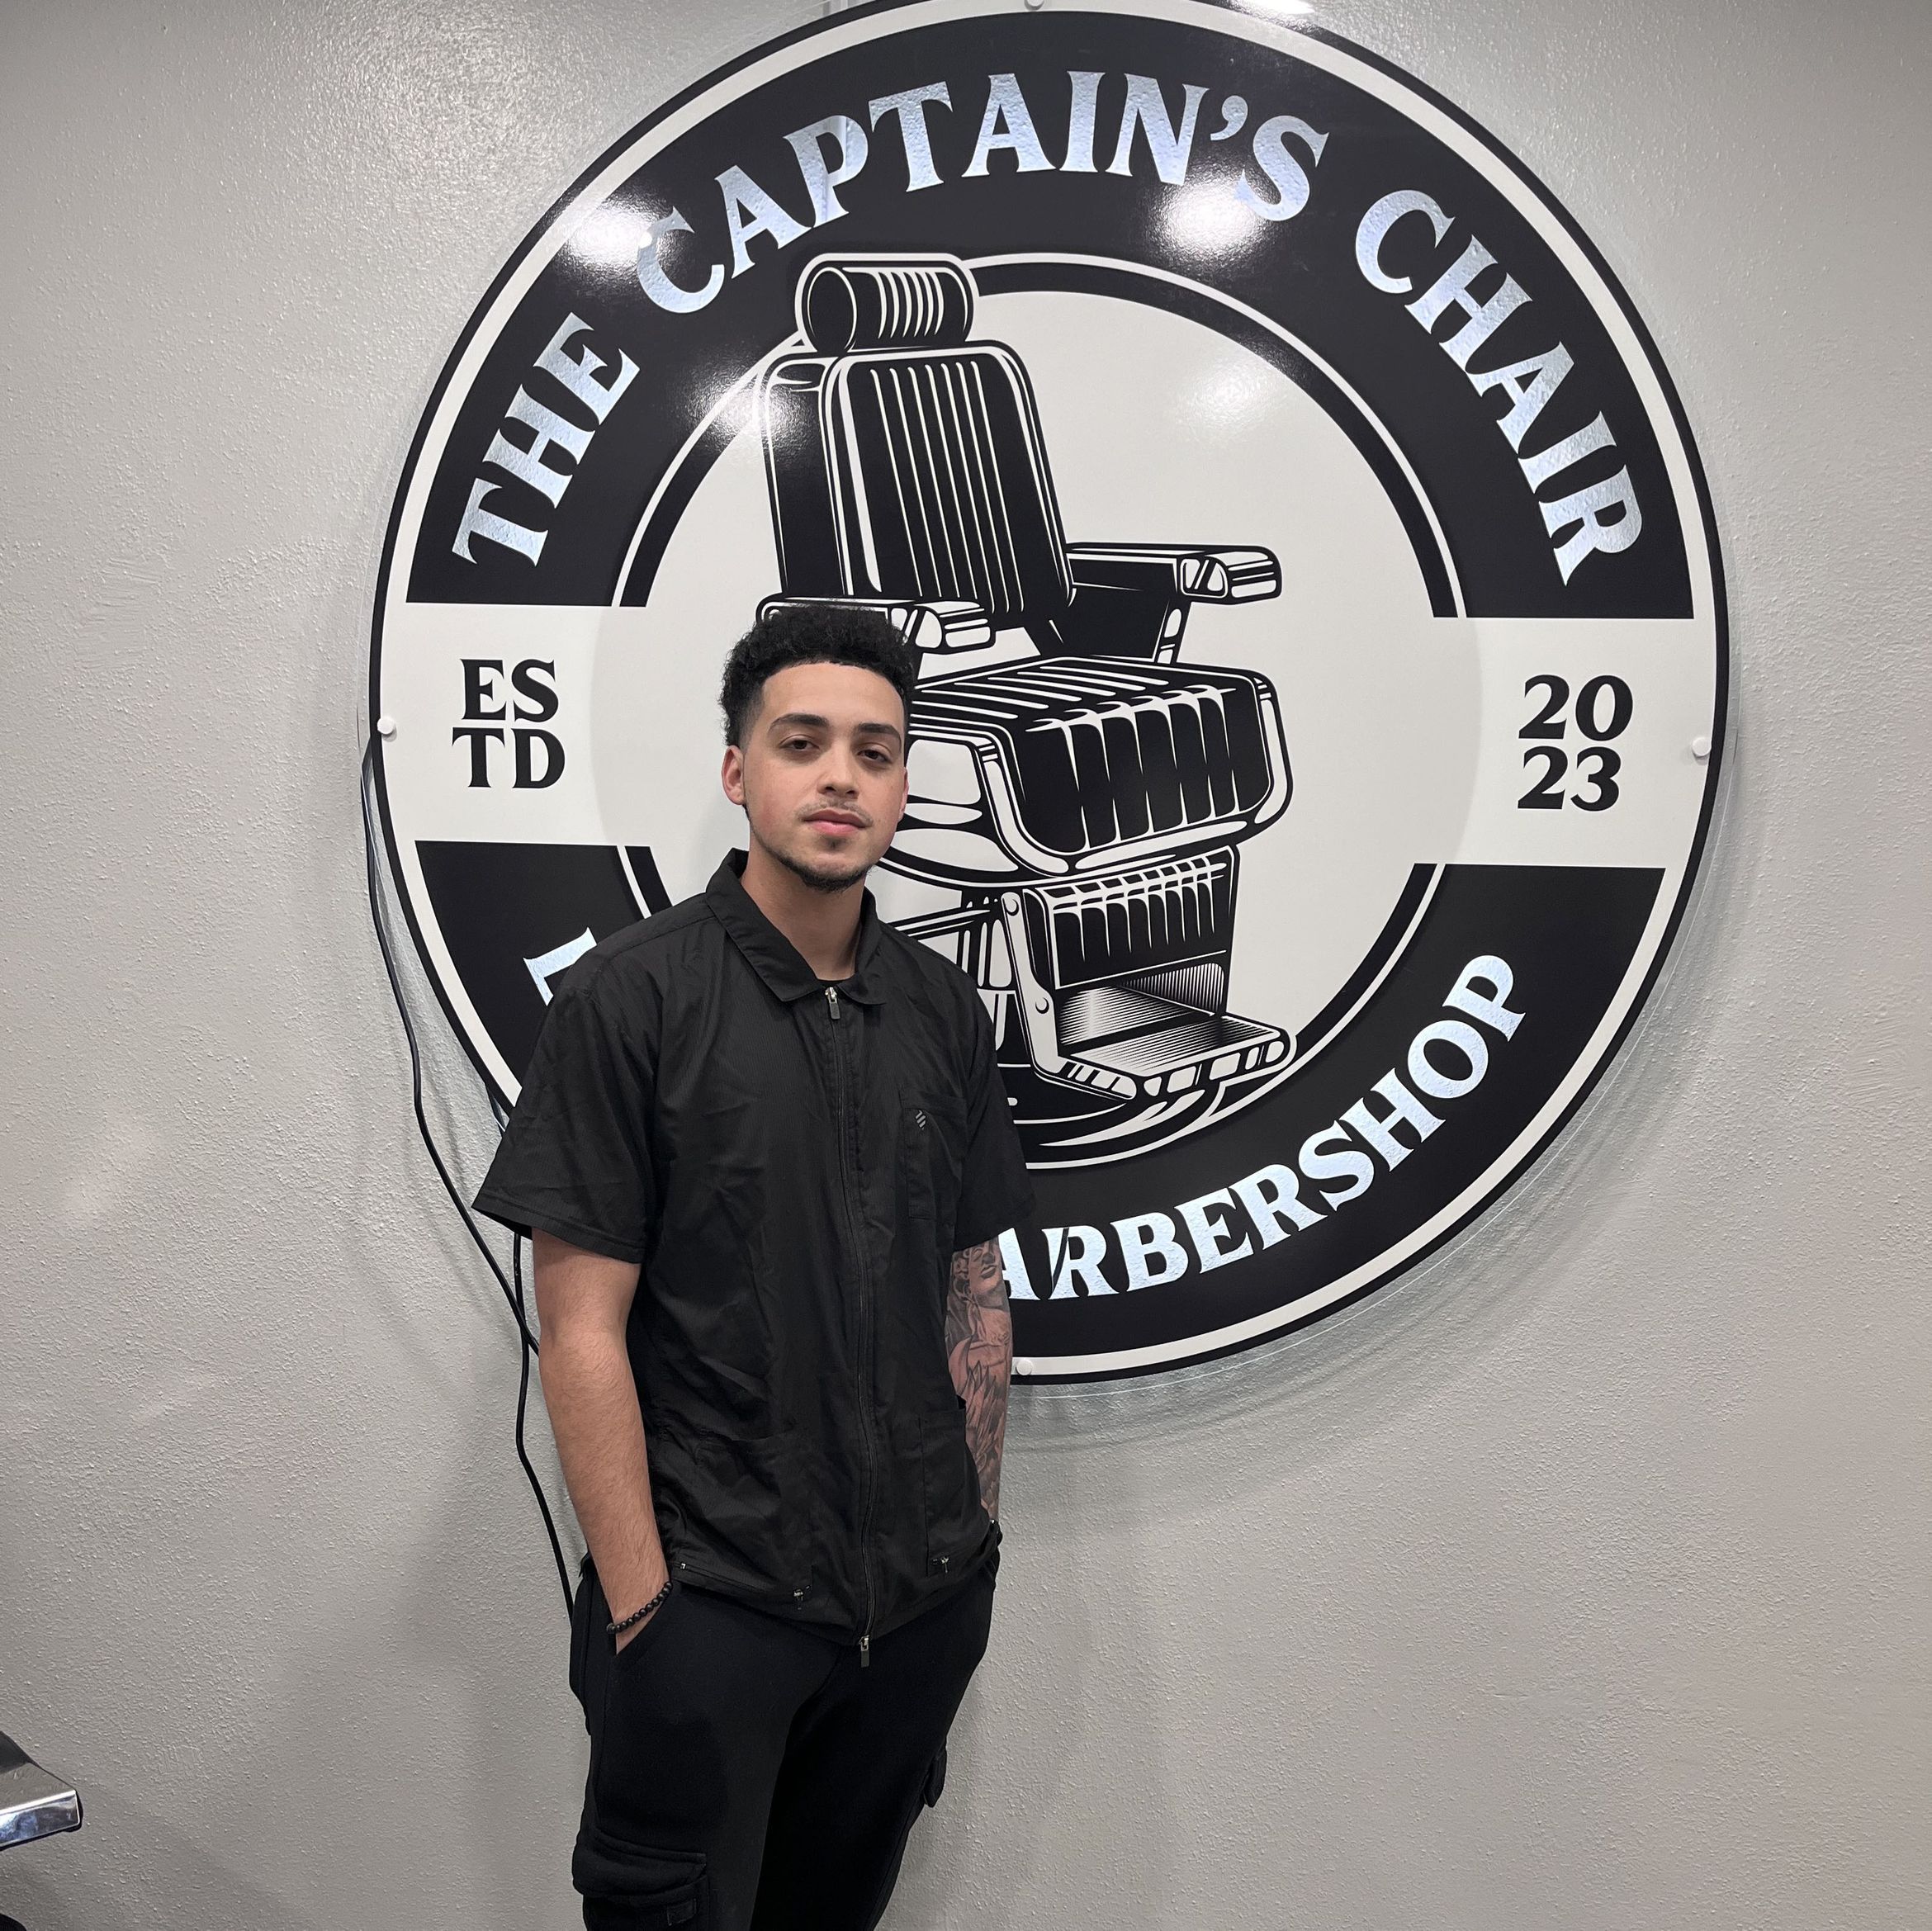 John at Captains Chair Luxury Barbershop, 14114 7th St, Dade City, 33525